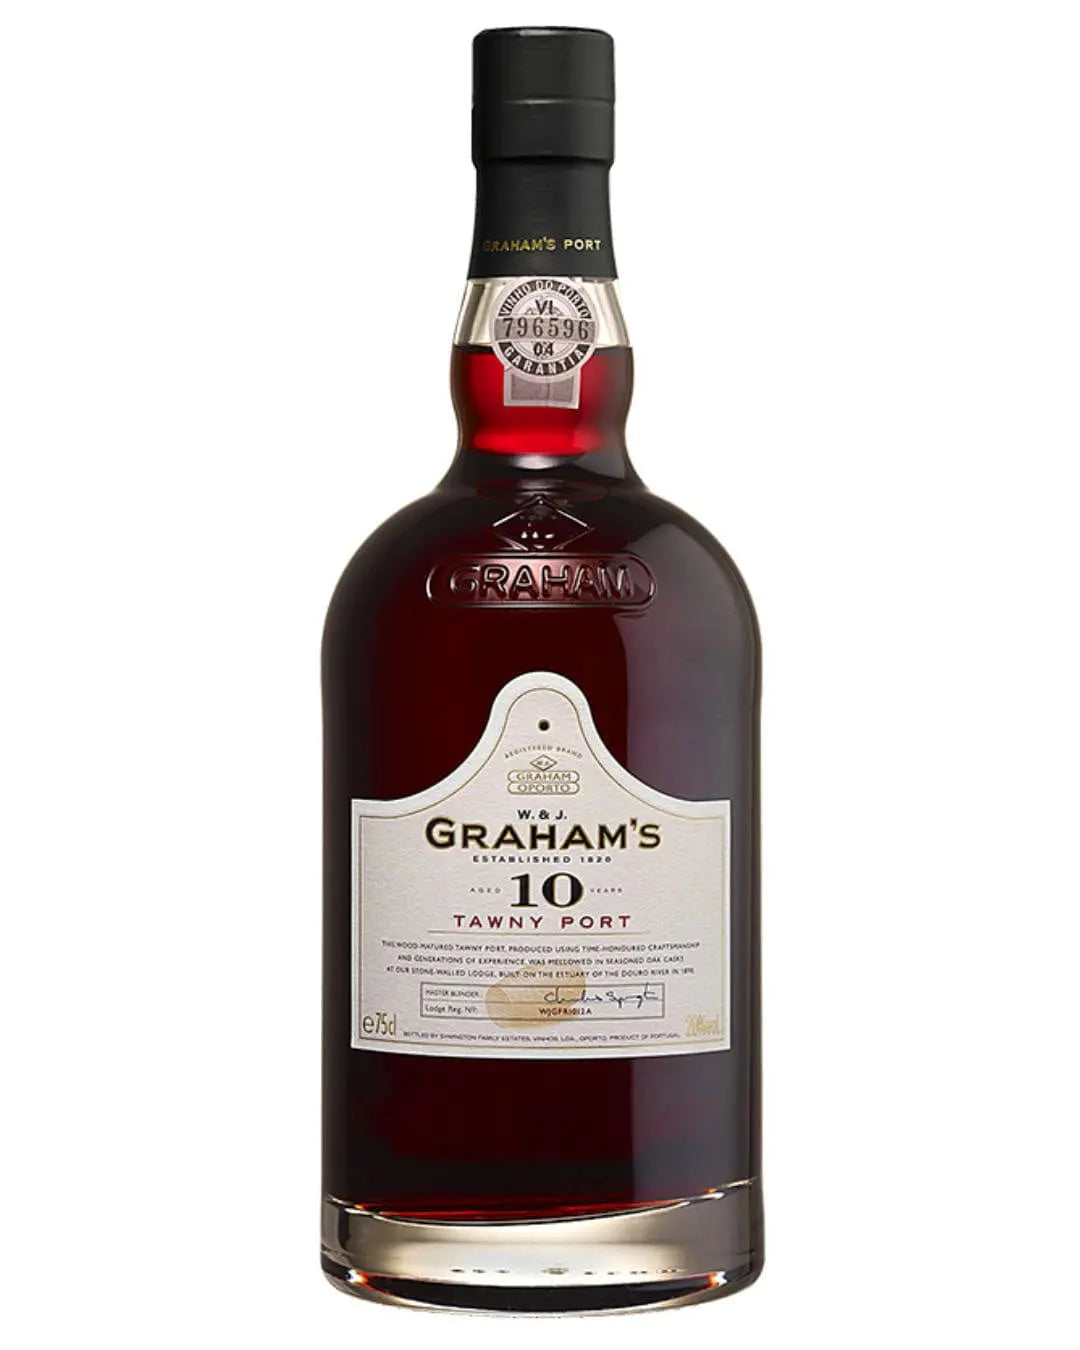 Graham's 10 Year Old Tawny, 75 cl Fortified & Other Wines